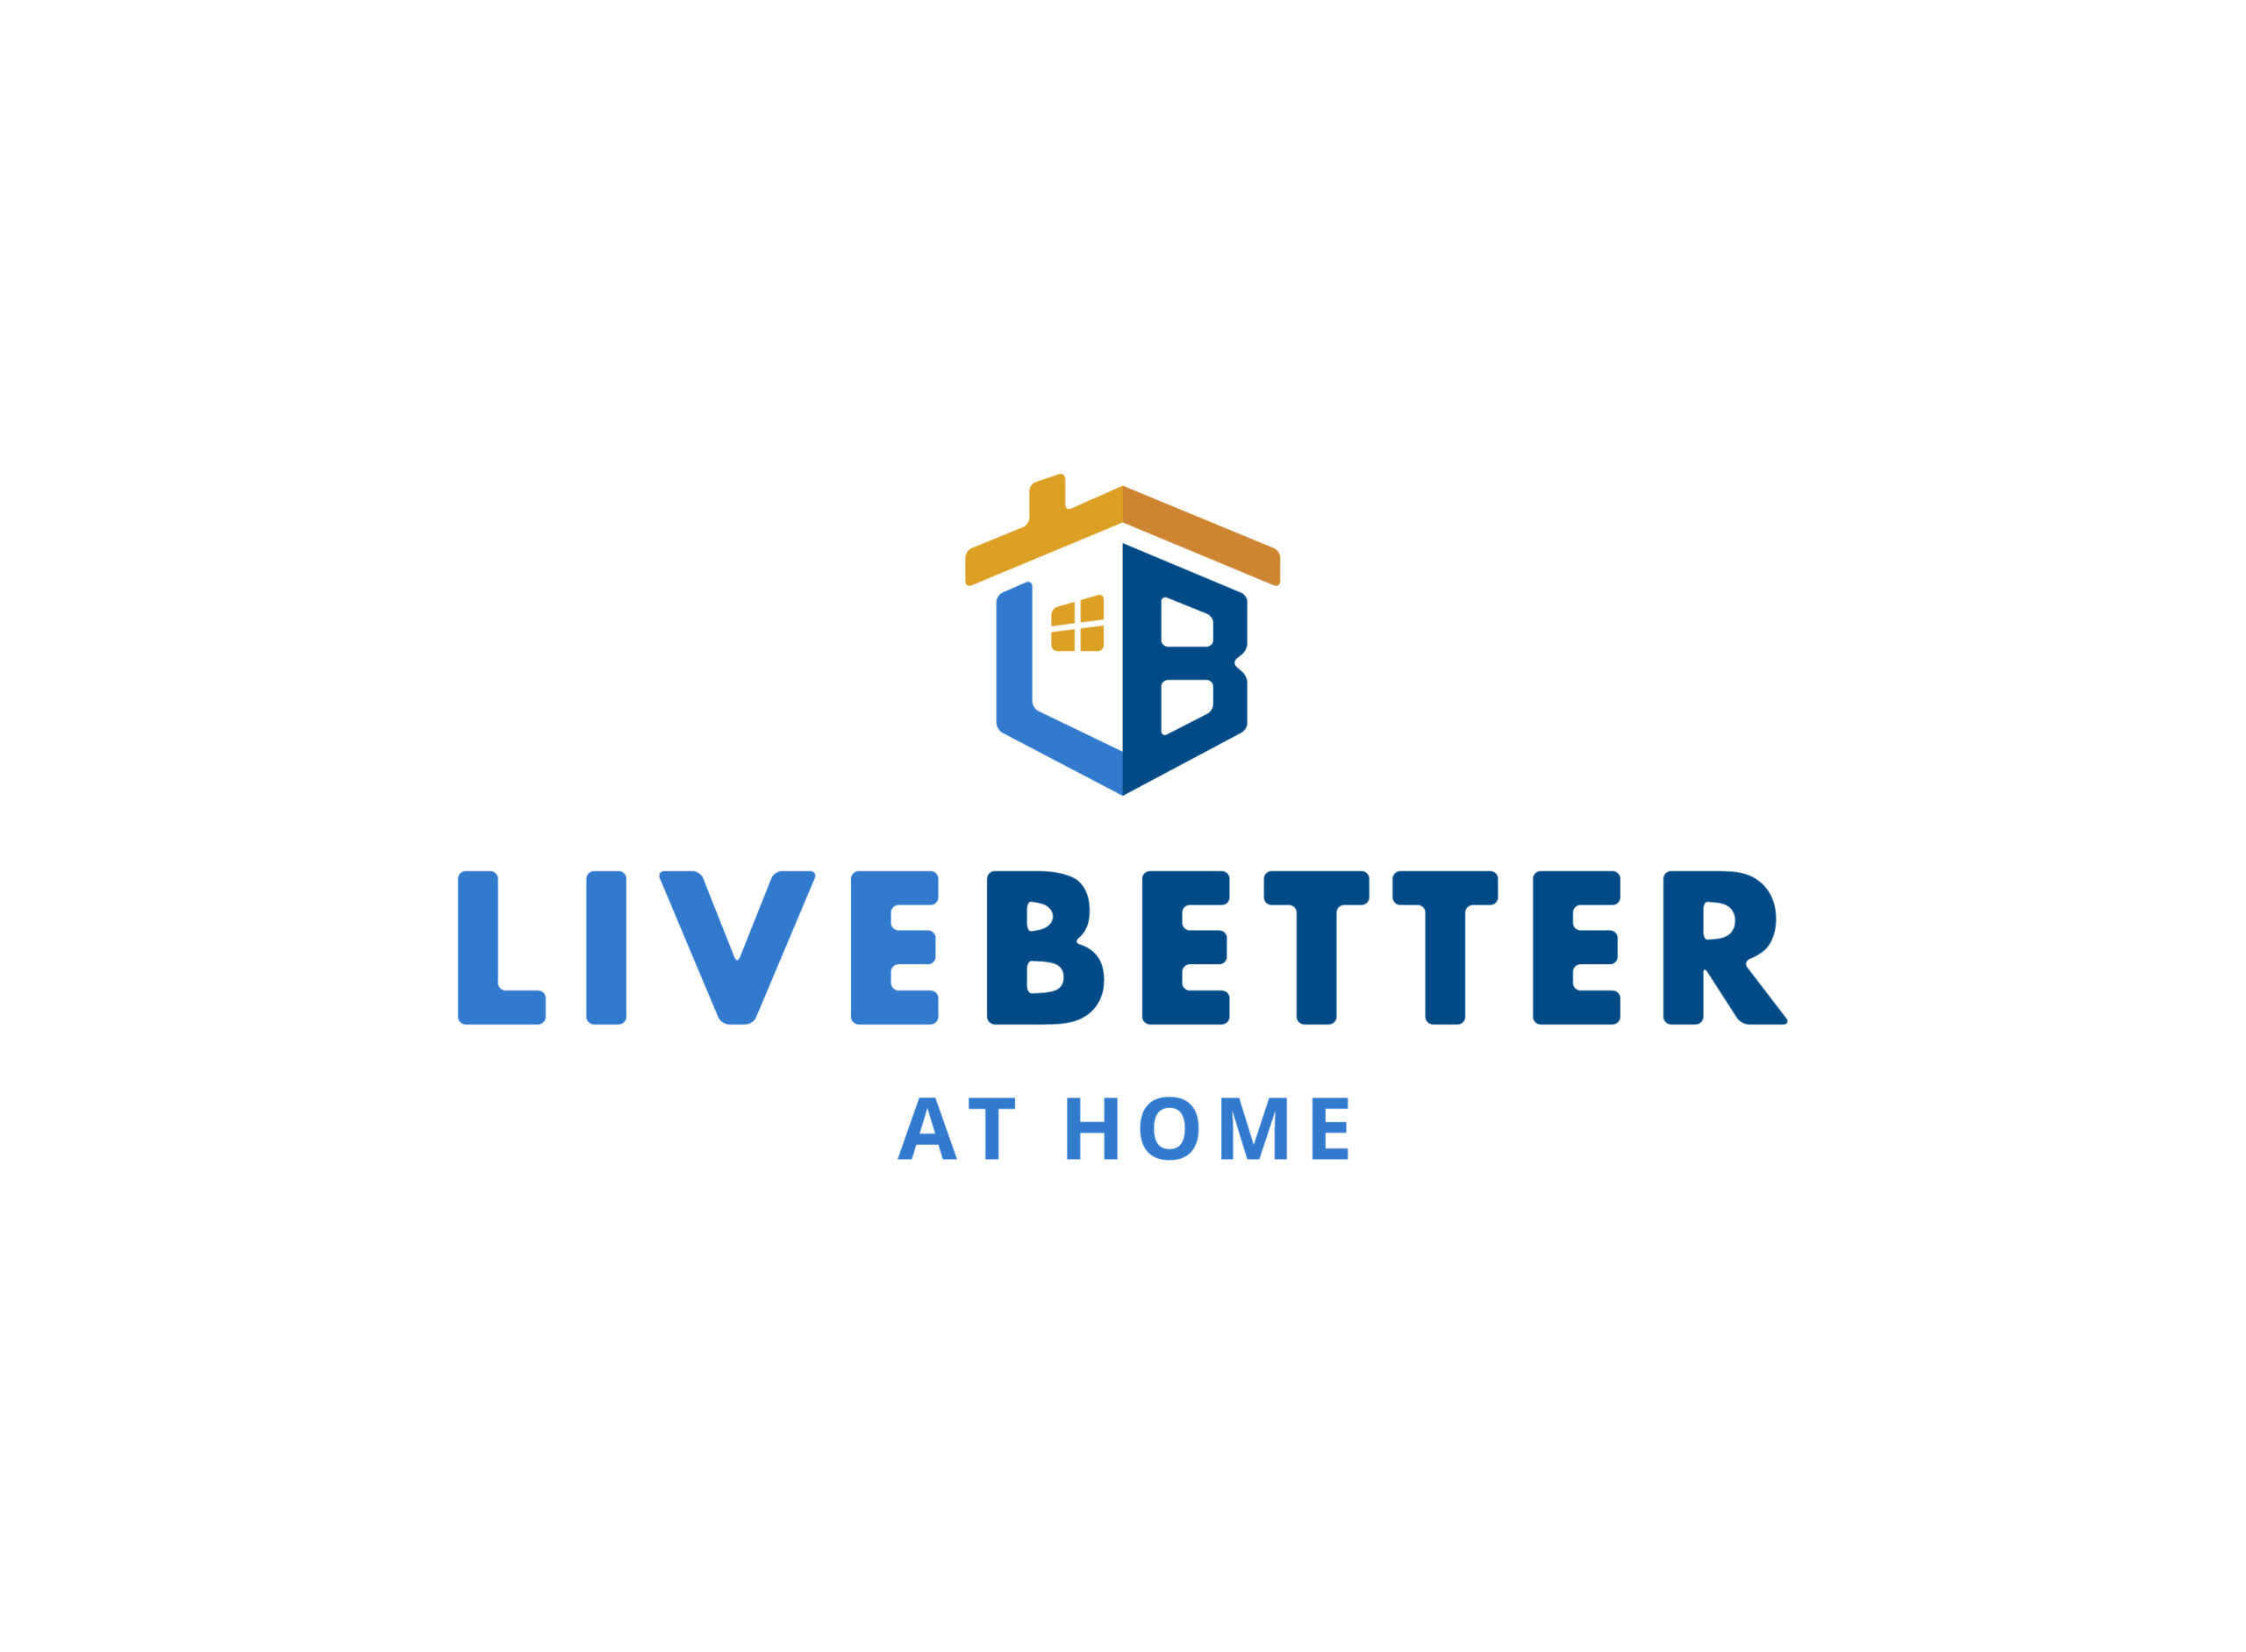 Live Better At Home